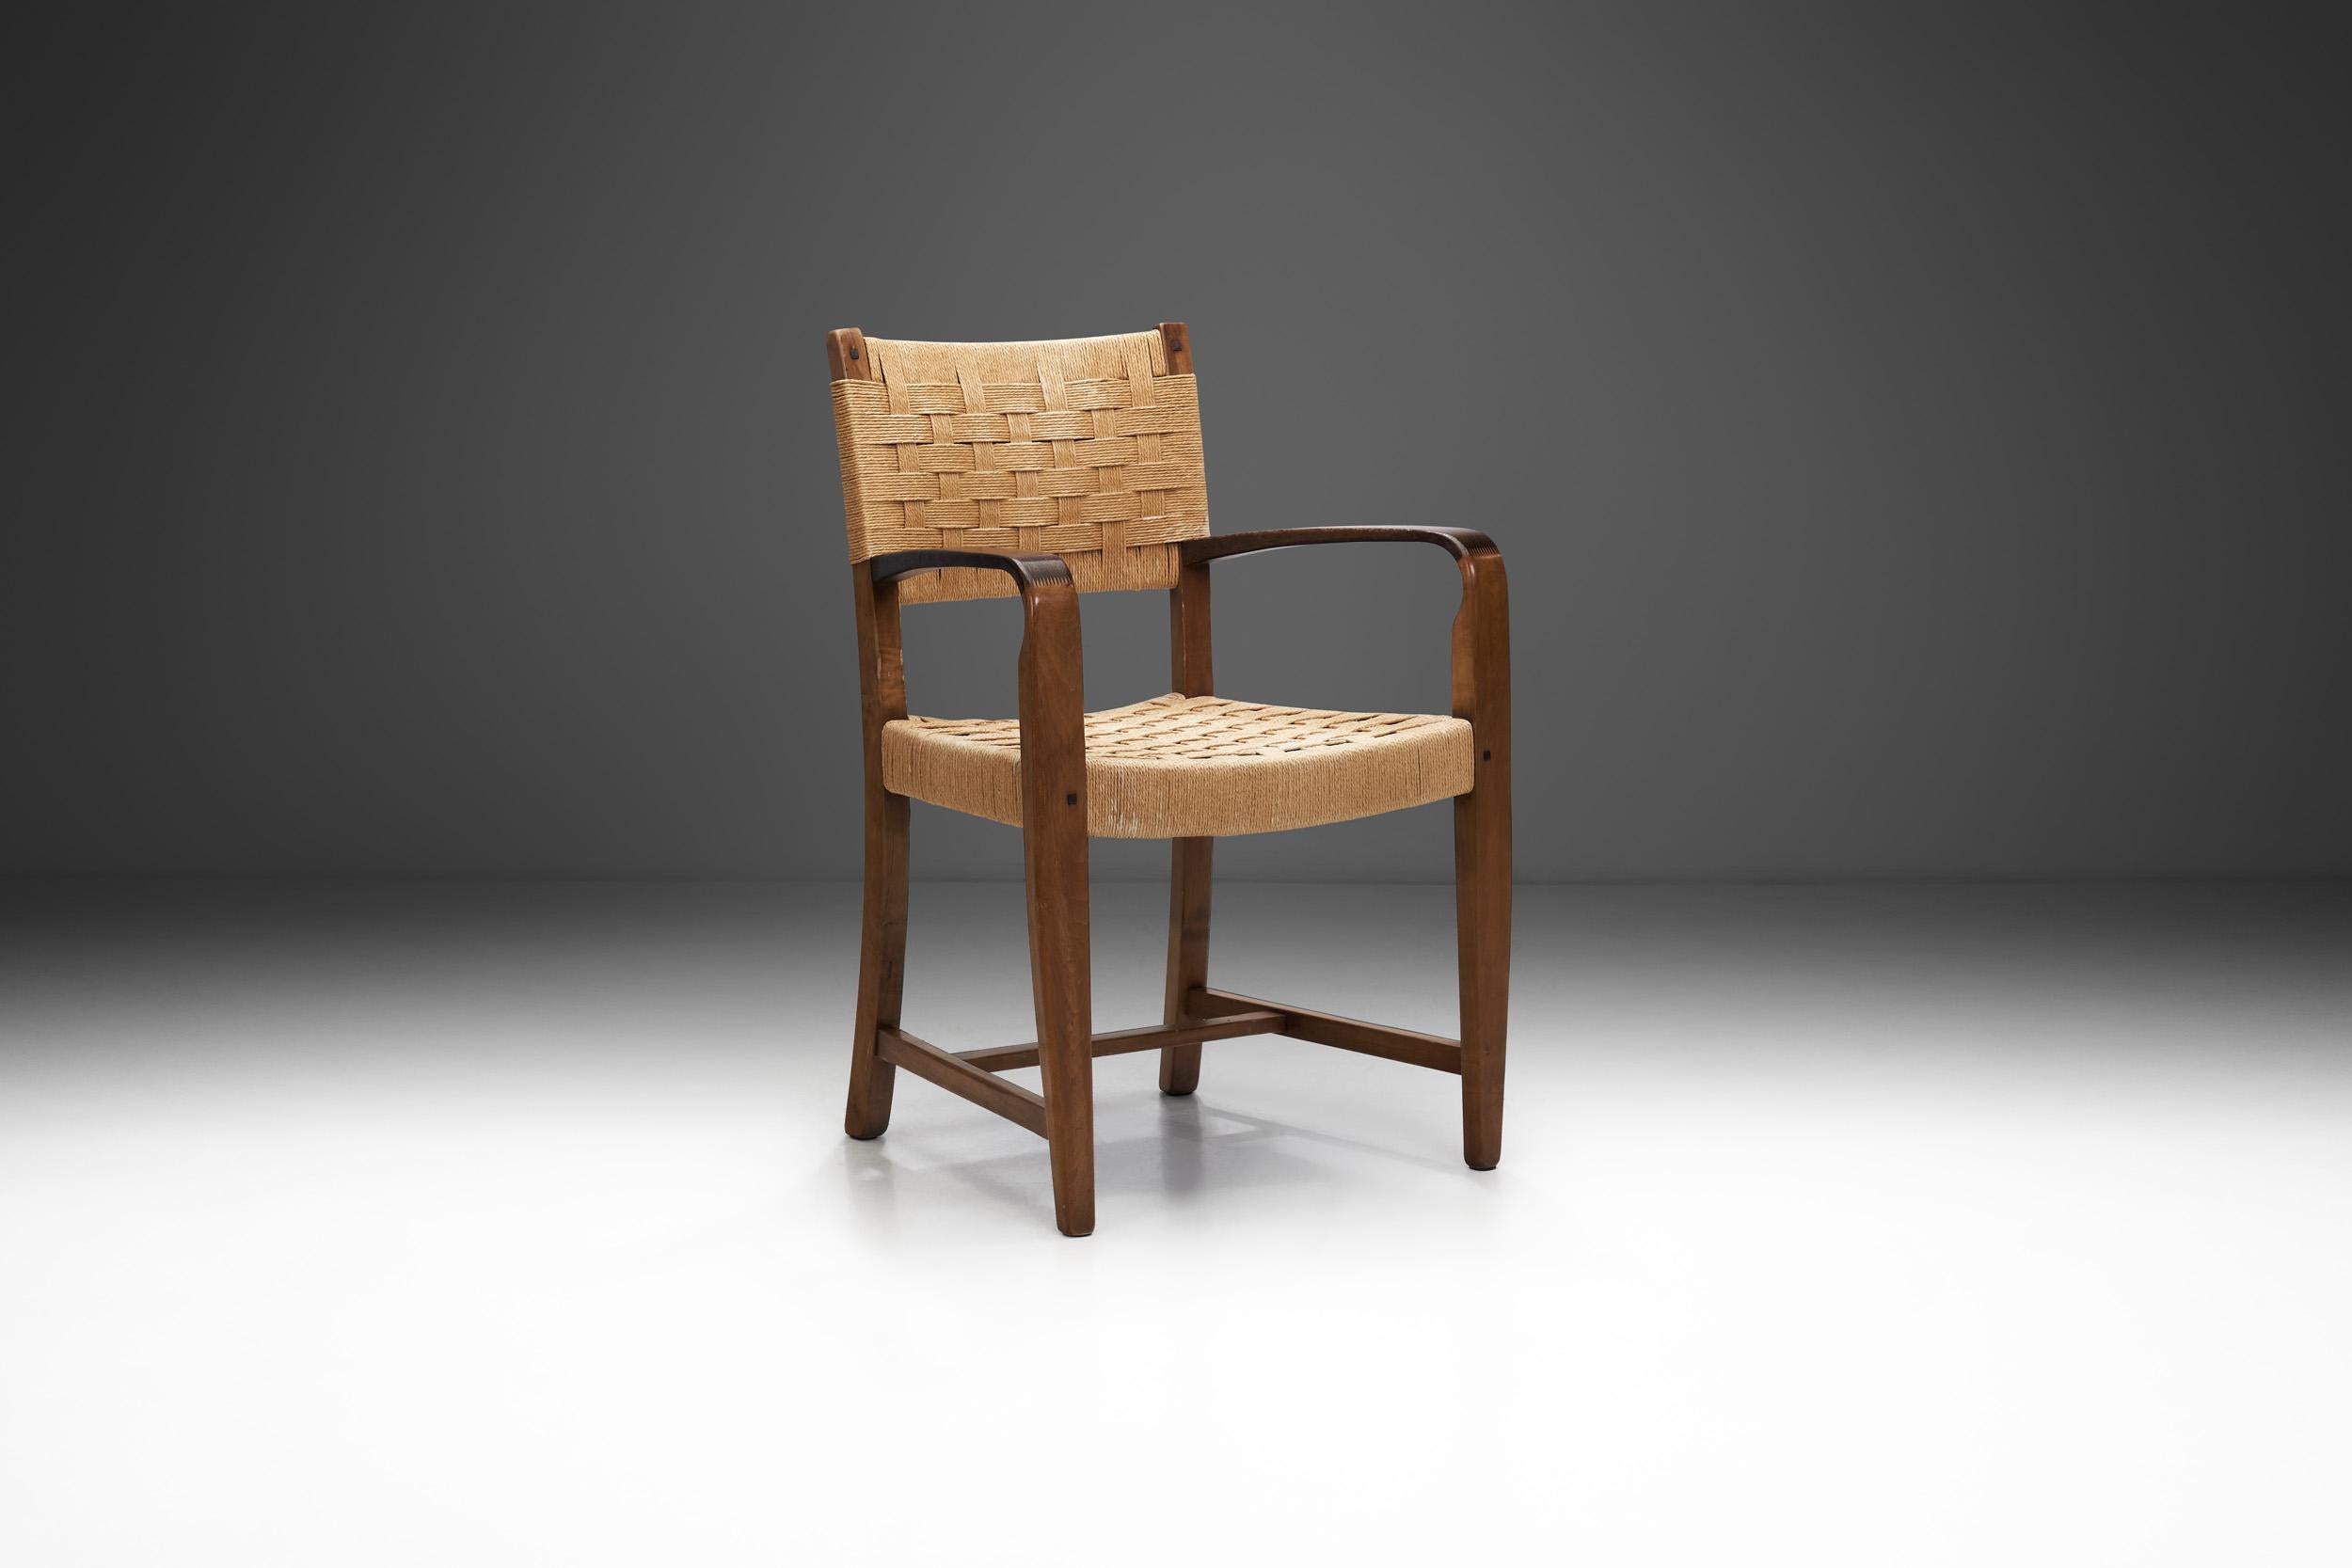 The Mid-Century Modern era cemented the design principles of quality, functionality, and an unadorned, understated look for future pieces in Belgium as well. Accordingly, this chair created in the 1970s is defined by its materials, the finely worked